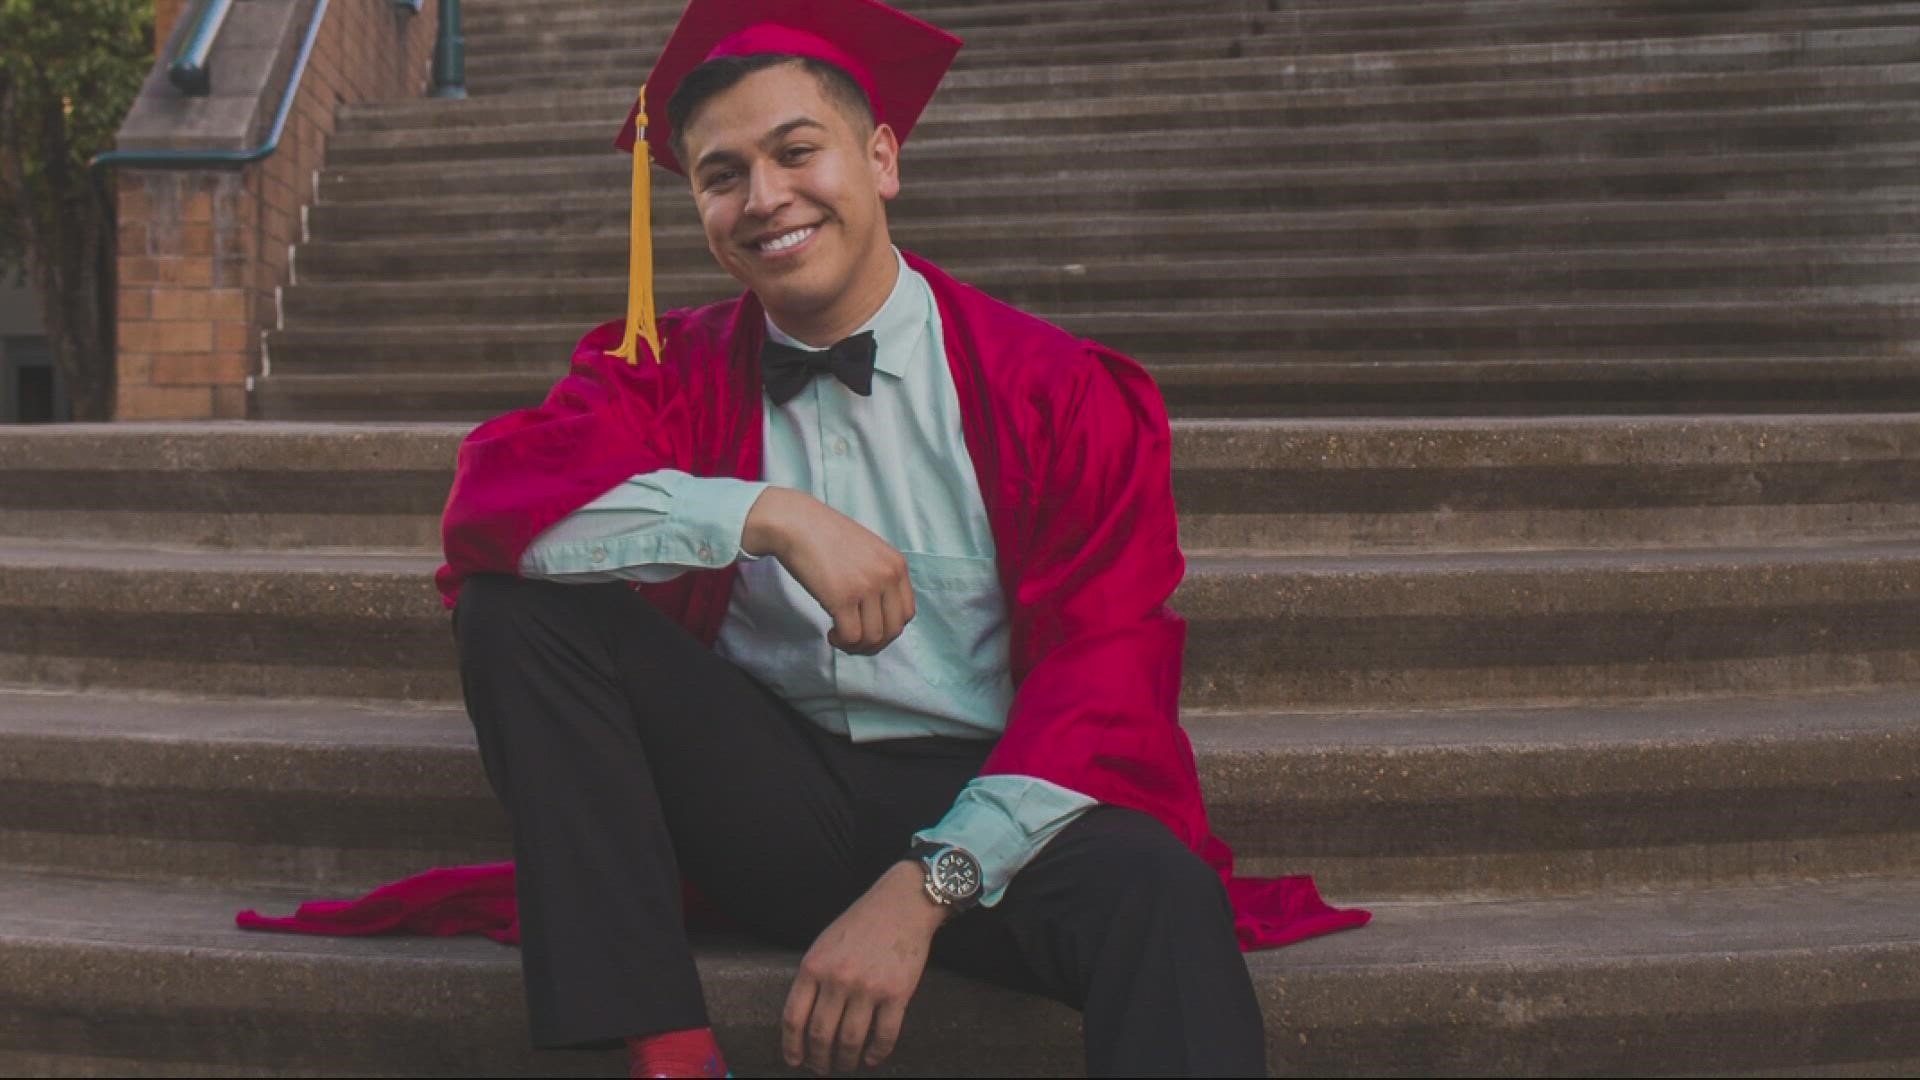 Salvador Garcia-Lopez got hooked up with the College Possible Program while in high school, that helped him get into and graduate from Western Oregon University